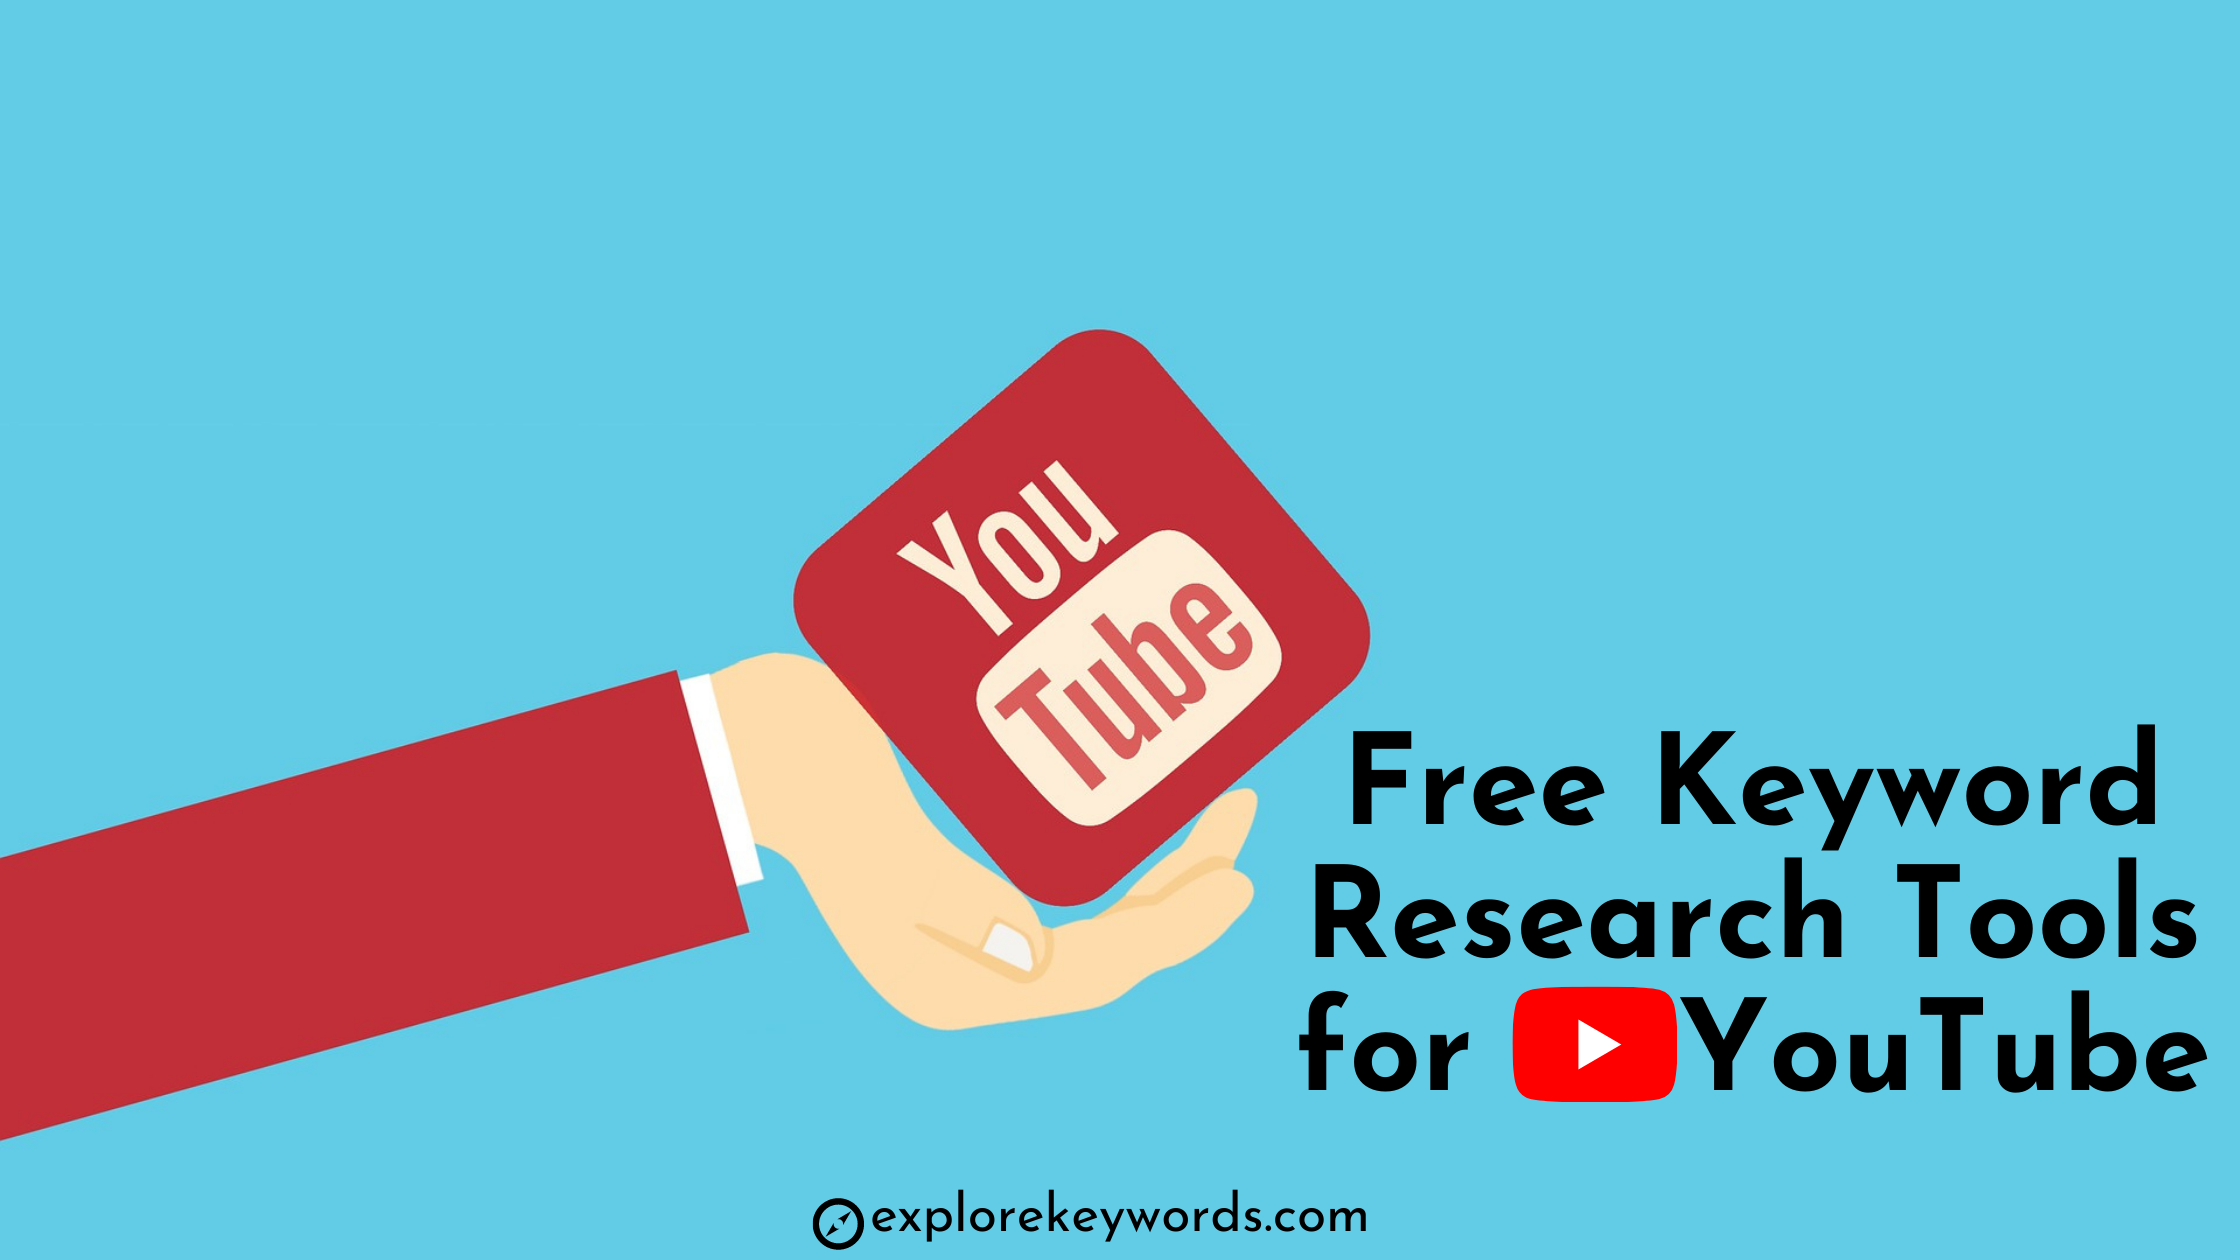 5 Best and Free Keyword Research Tools for Youtube in 2021